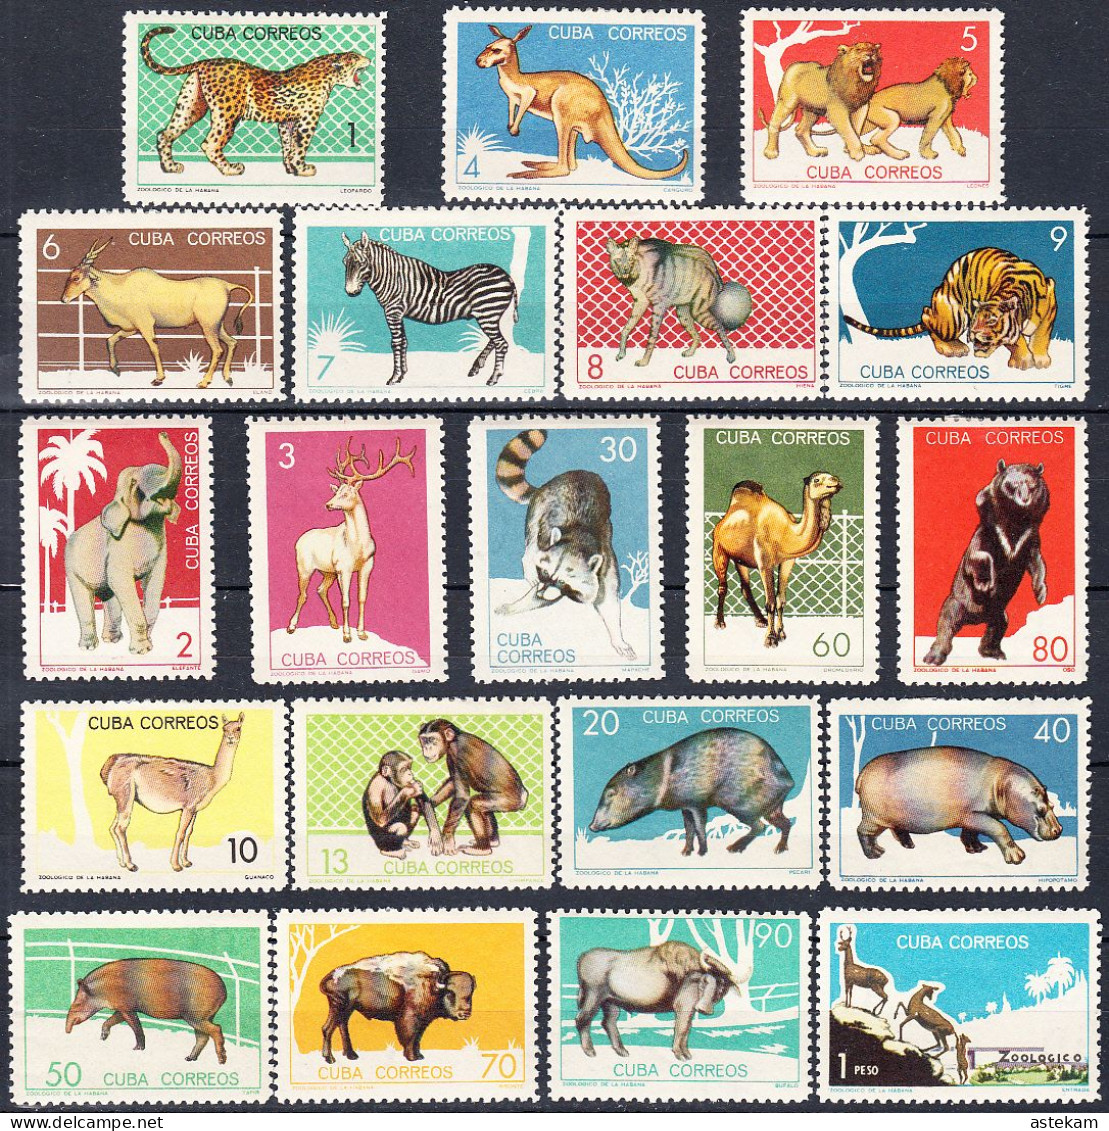 CUBA 1964, FAUNA, WILD ANIMALS From The HAVANA ZOO, COMPLETE MNH SERIES With ORIGINAL GLUE And PATCHES In GOOD QUALITY - Gebraucht